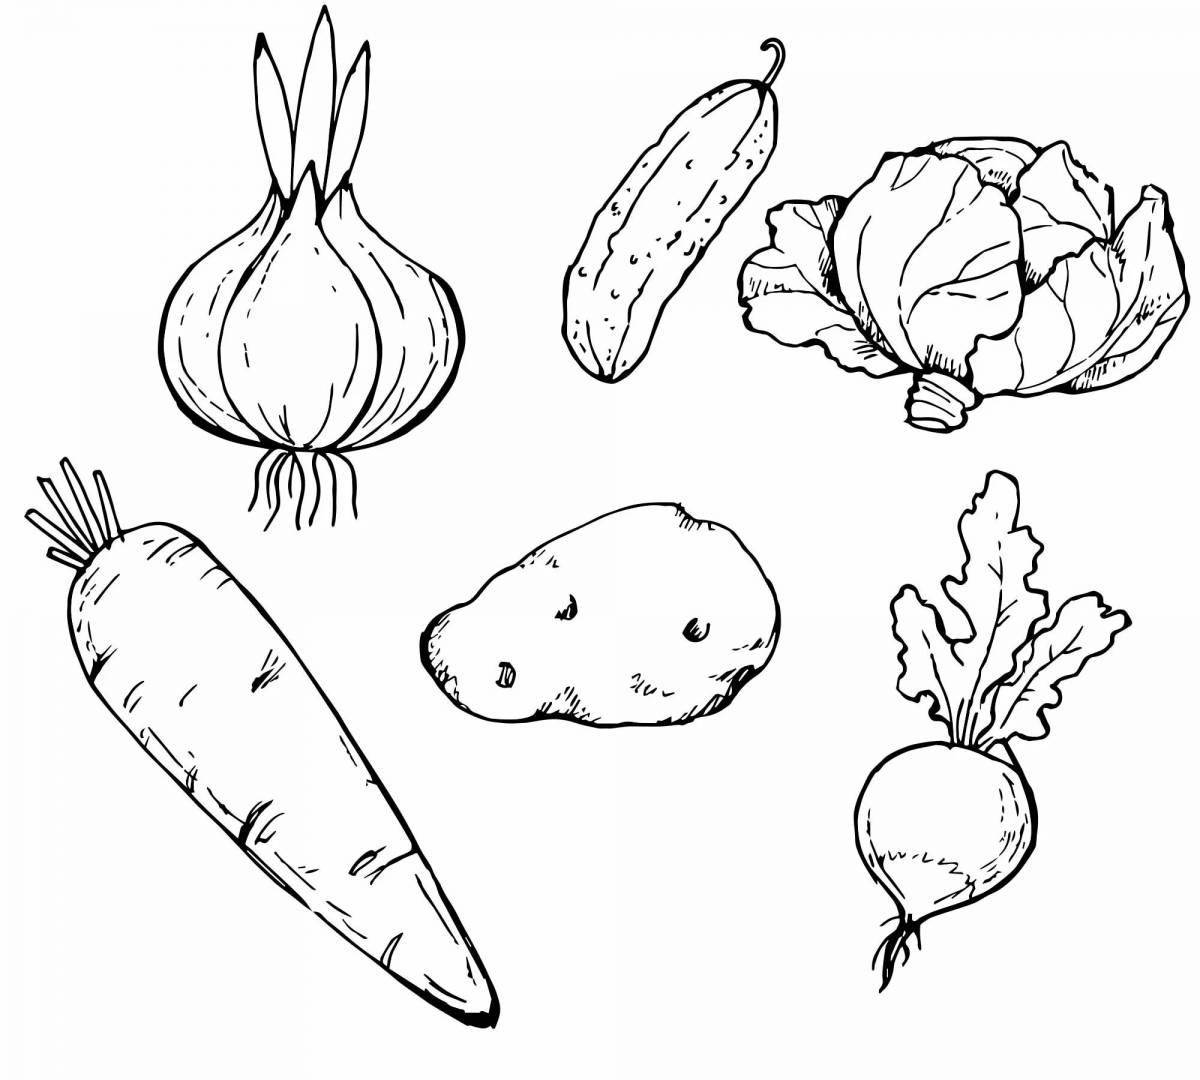 Colorful fun vegetable coloring book for kids